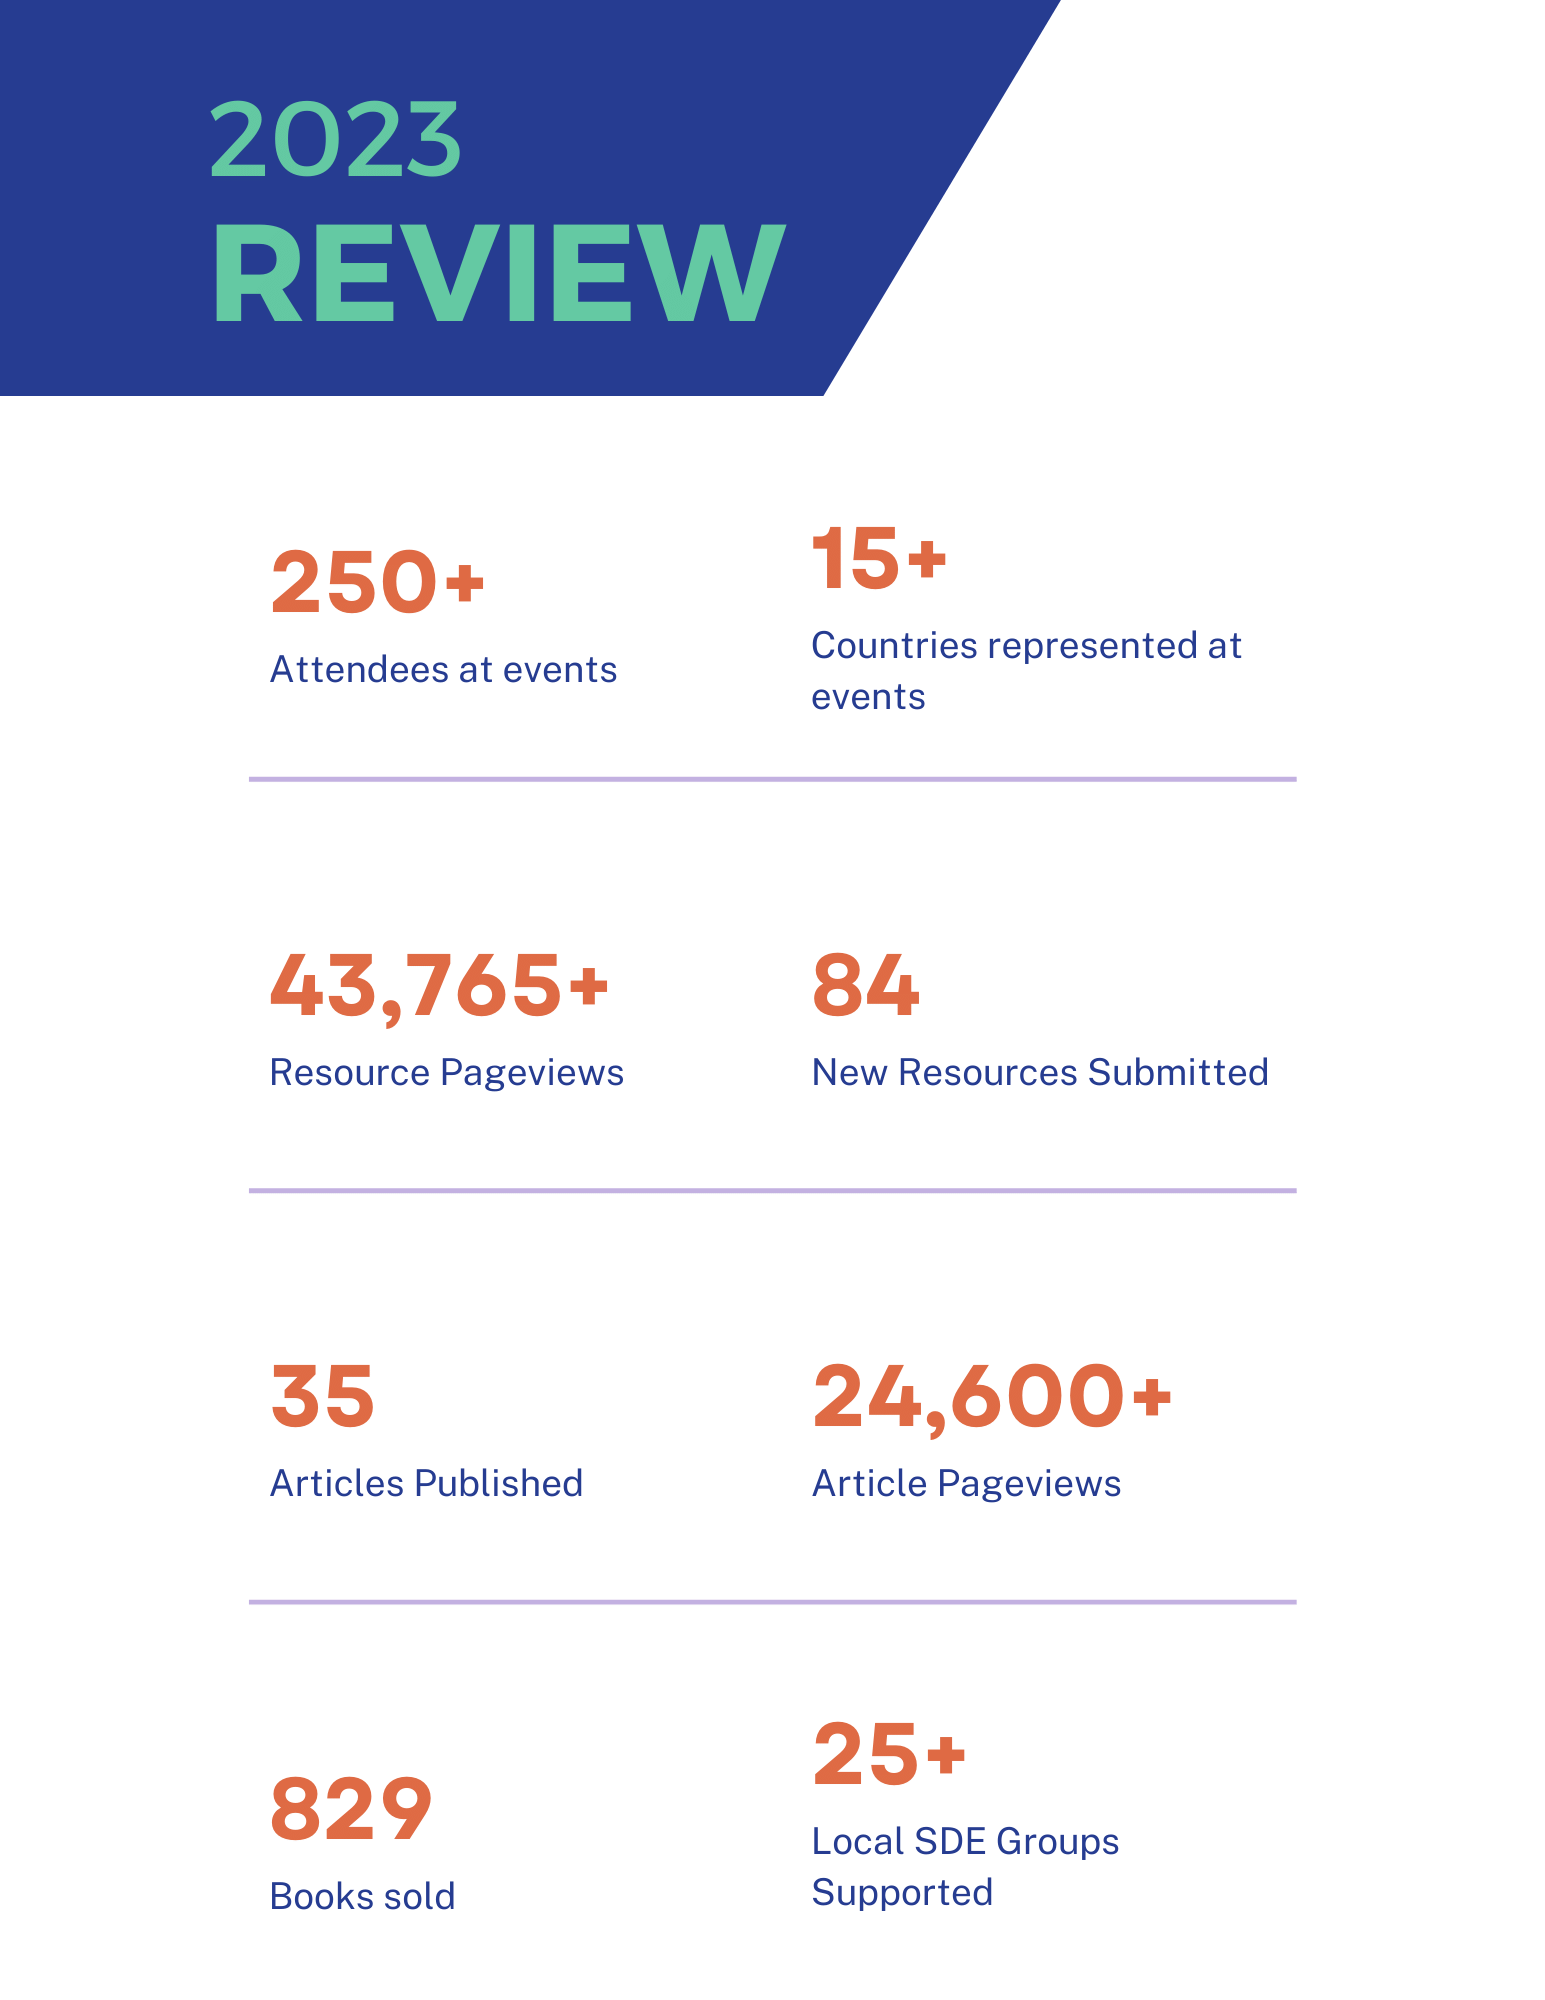 2023 in Review: 250+ Attendees at events, 15+ Countries represented at events, 43,765+ Resource Pageviews, 84 New Resources Submitted, 35 Articles Published, 24,600+ Article Pageviews, 829 Books sold, 25+ Local SDE Groups Supported